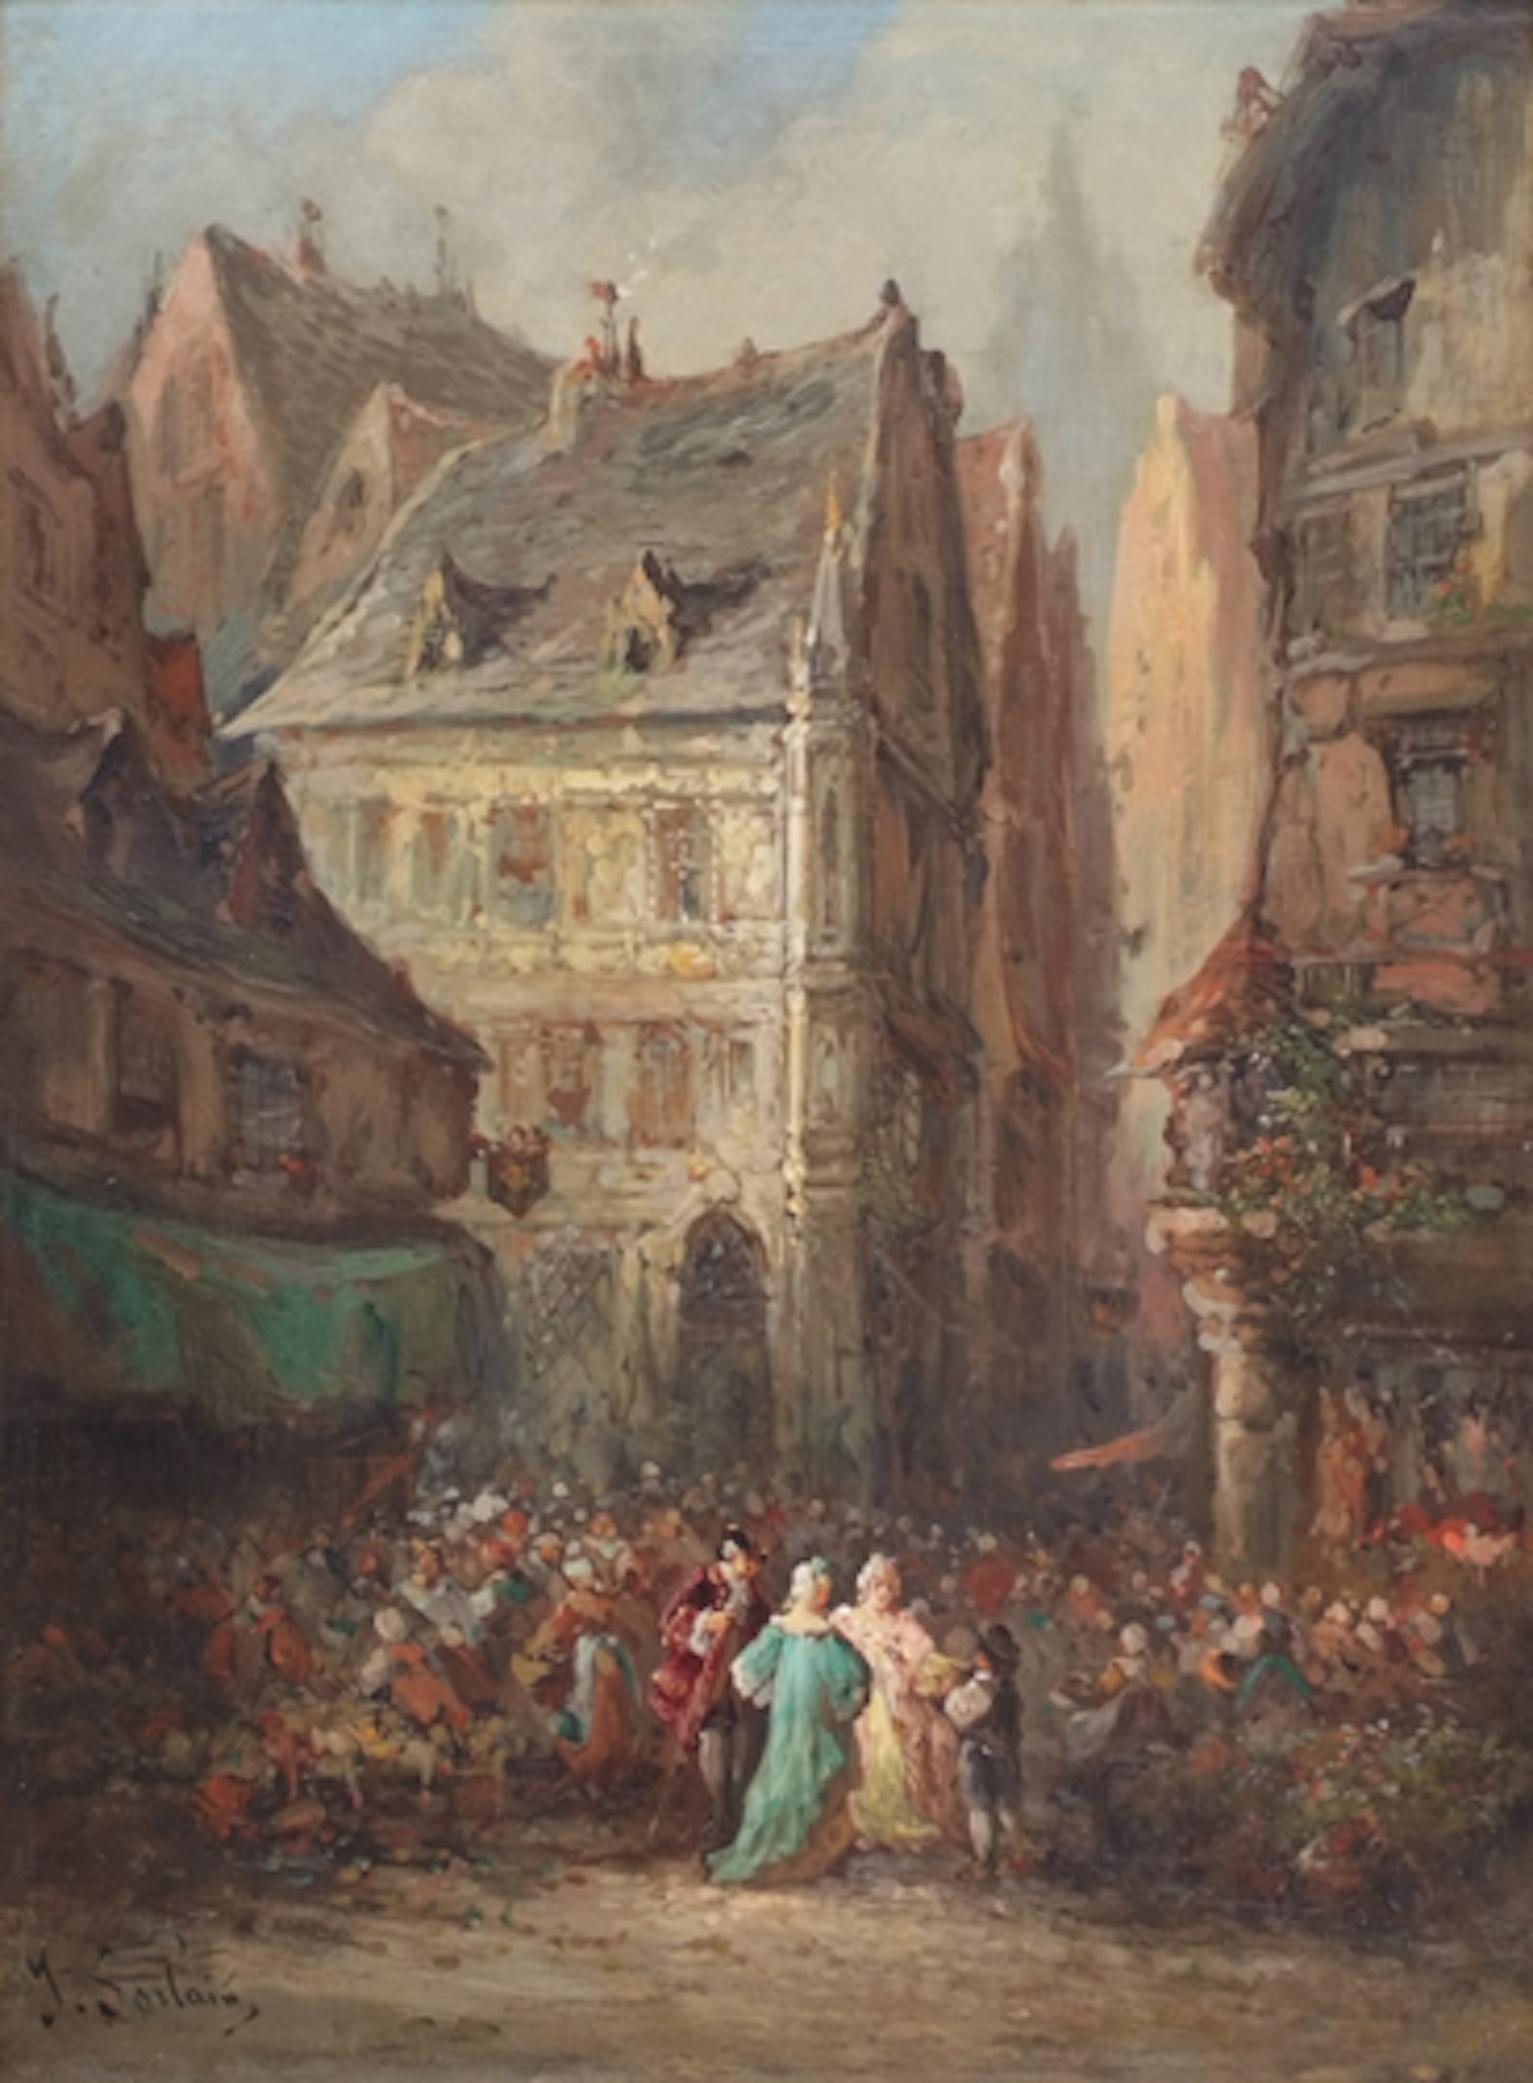 SORLAIN J. (1859 - 1942)
A lively Market in Rouen in the 18th century
Oil on canvas signed low left
Frame gilded with leaves
Dim canvas : 73 X 54 cm
Dim frame : 94 X 75 cm

Jean SORLAIN, Pseudonym used by Paul DENARIE (1859 - 1942)
Born in 1859 à